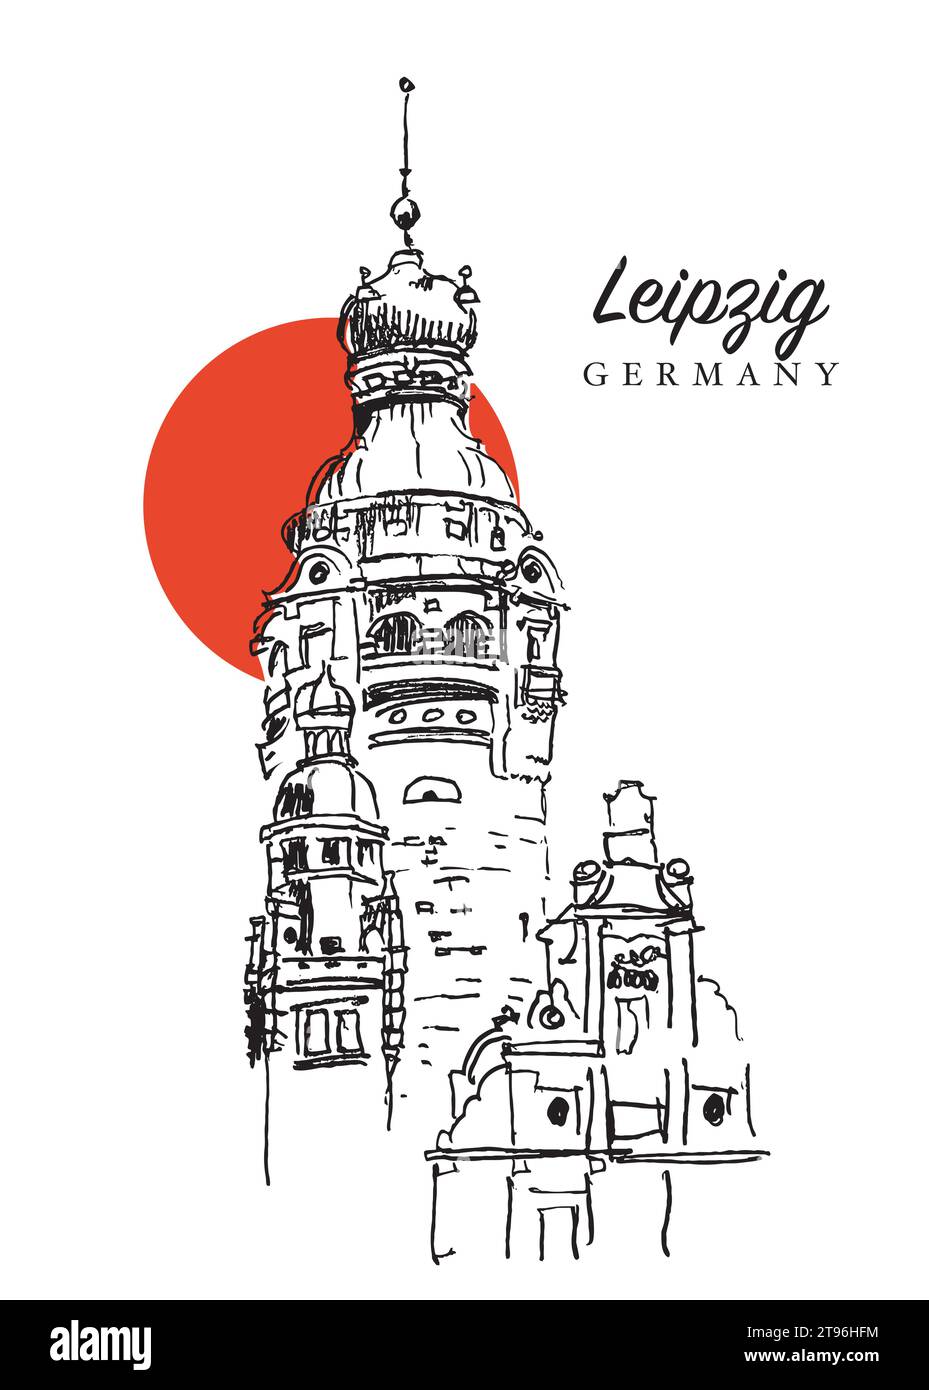 Vector hand drawn sketch illustration of the Neues Rathaus, the New Town Hall of Leipzig, Saxony, Germany. Stock Vector